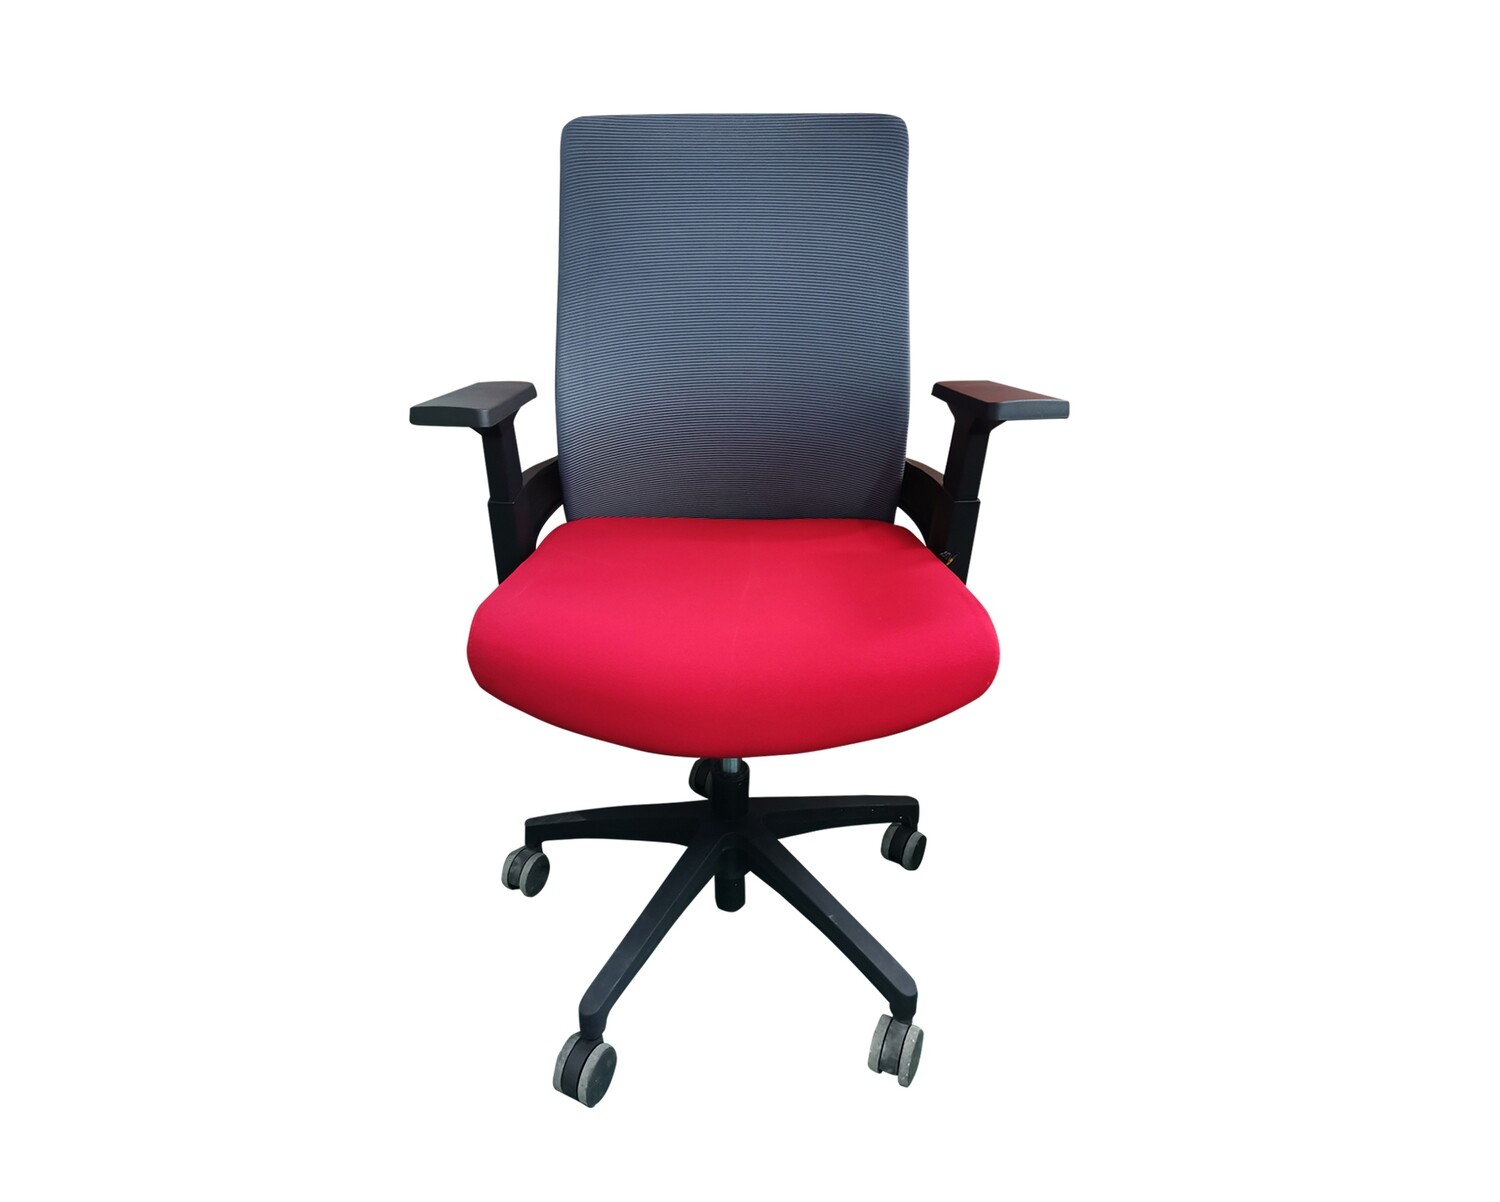 Ofix Deluxe-F11/F10 Mid Back/High Back Fabric Chair (Grey-Red)/(Black, Red)